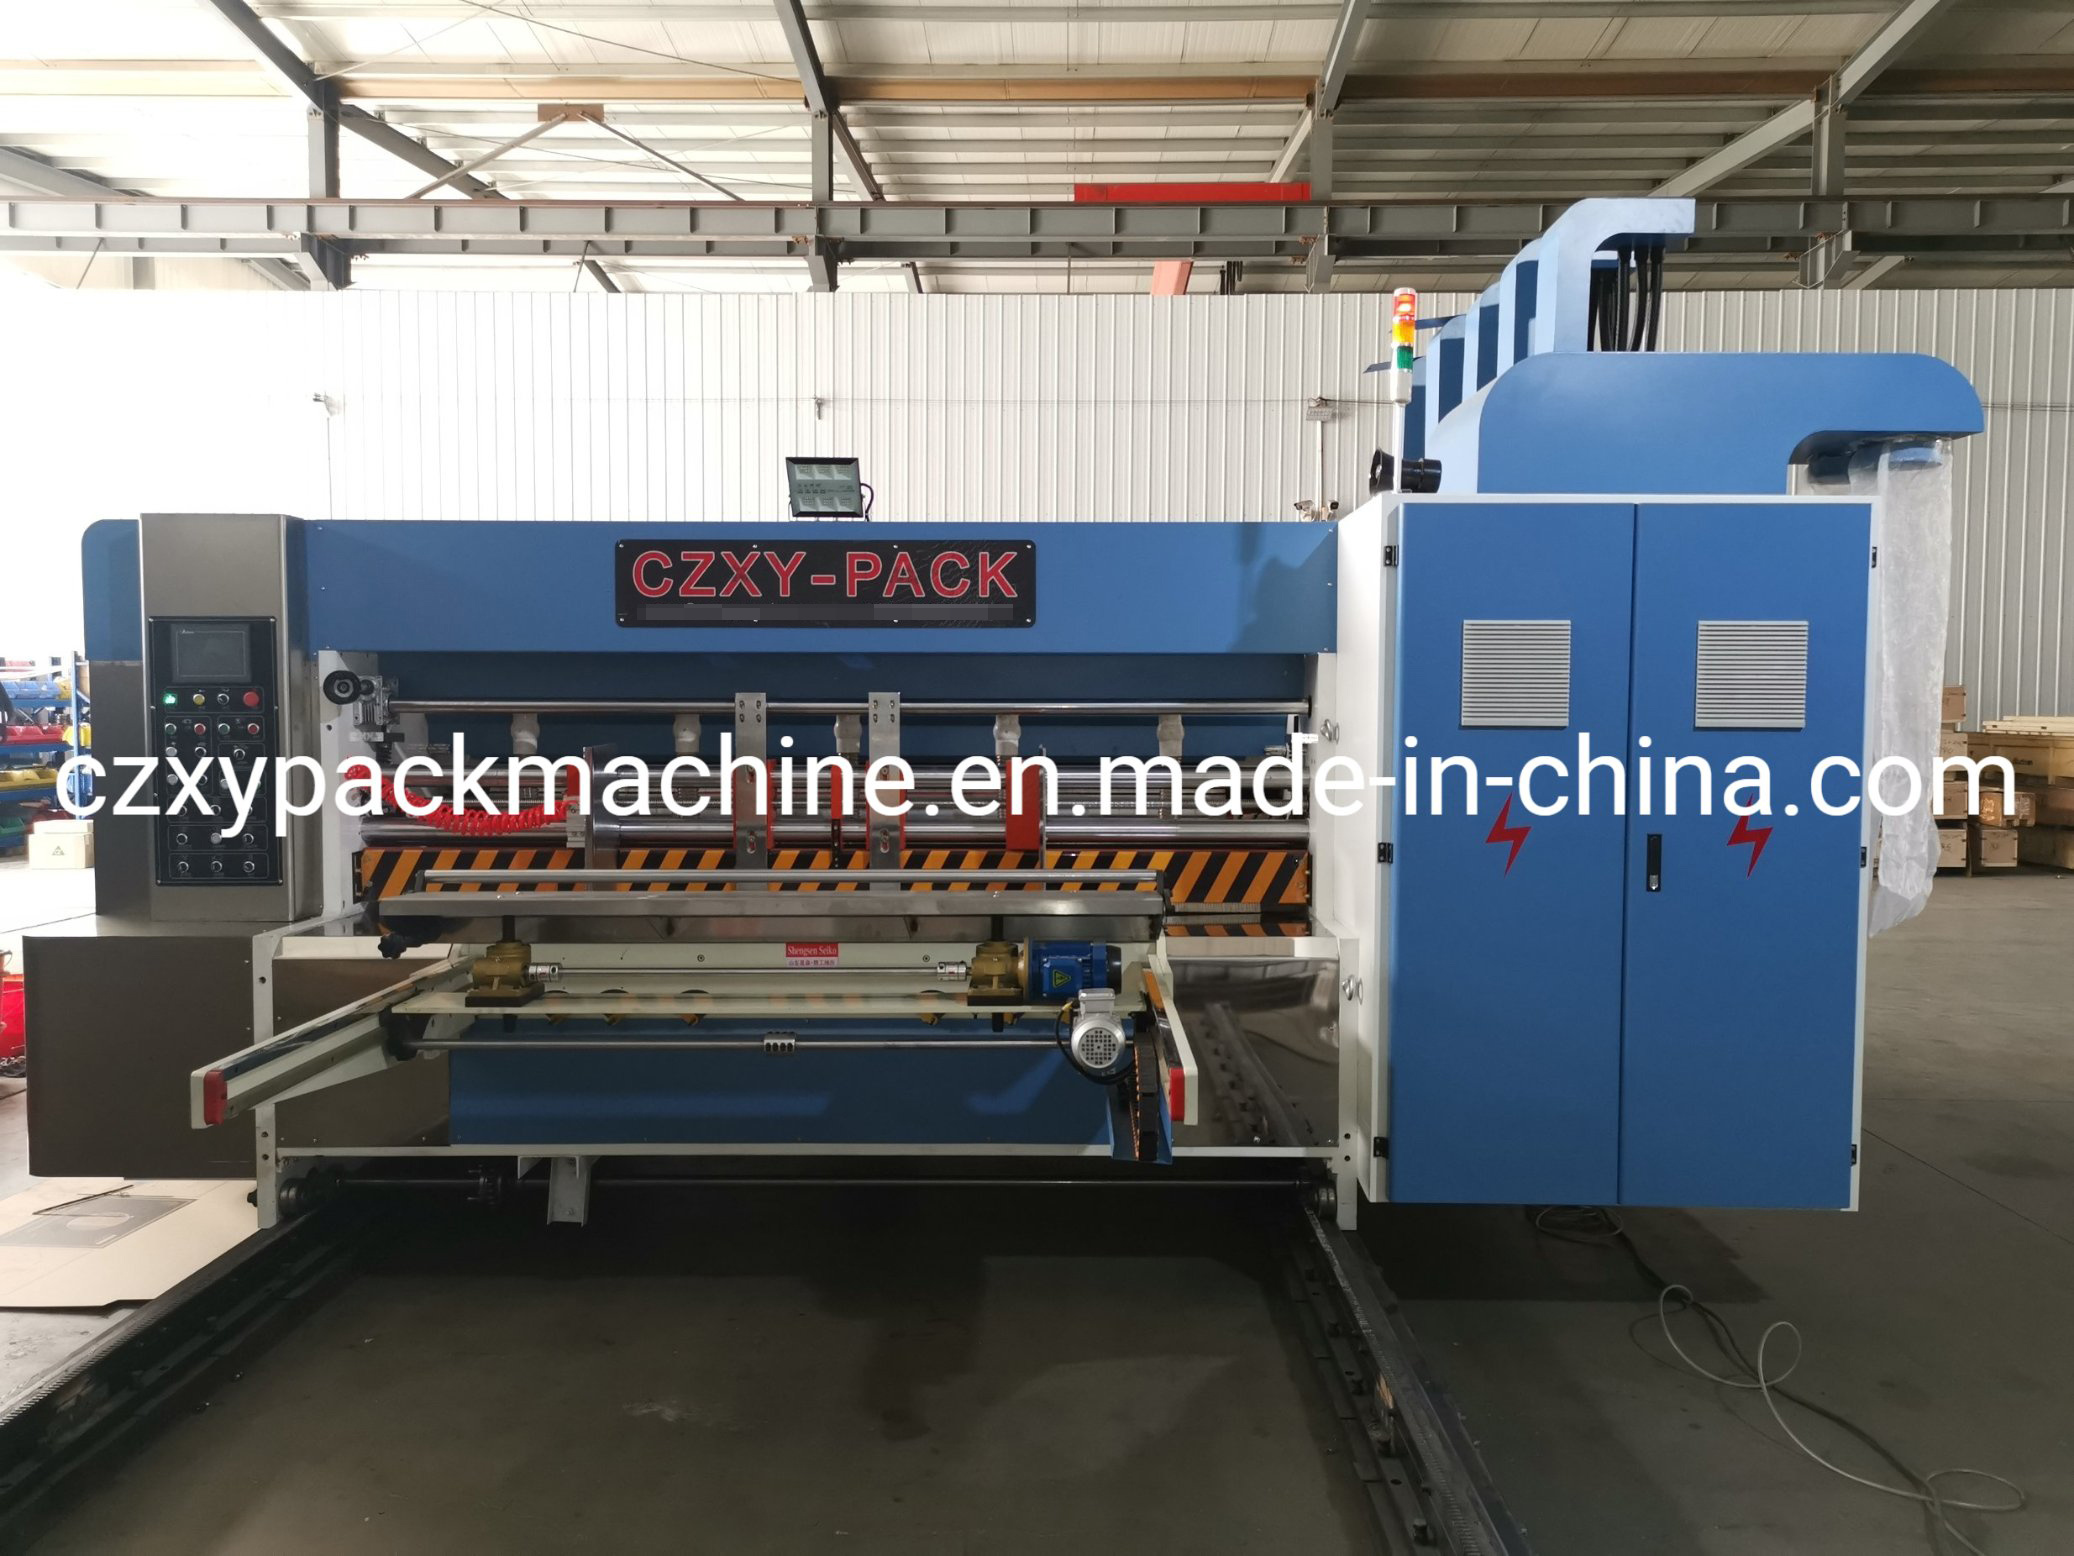 Czxy-Pack Packaging Machine for Cardboard Boxes Printing Slotting Die Cutting Machine